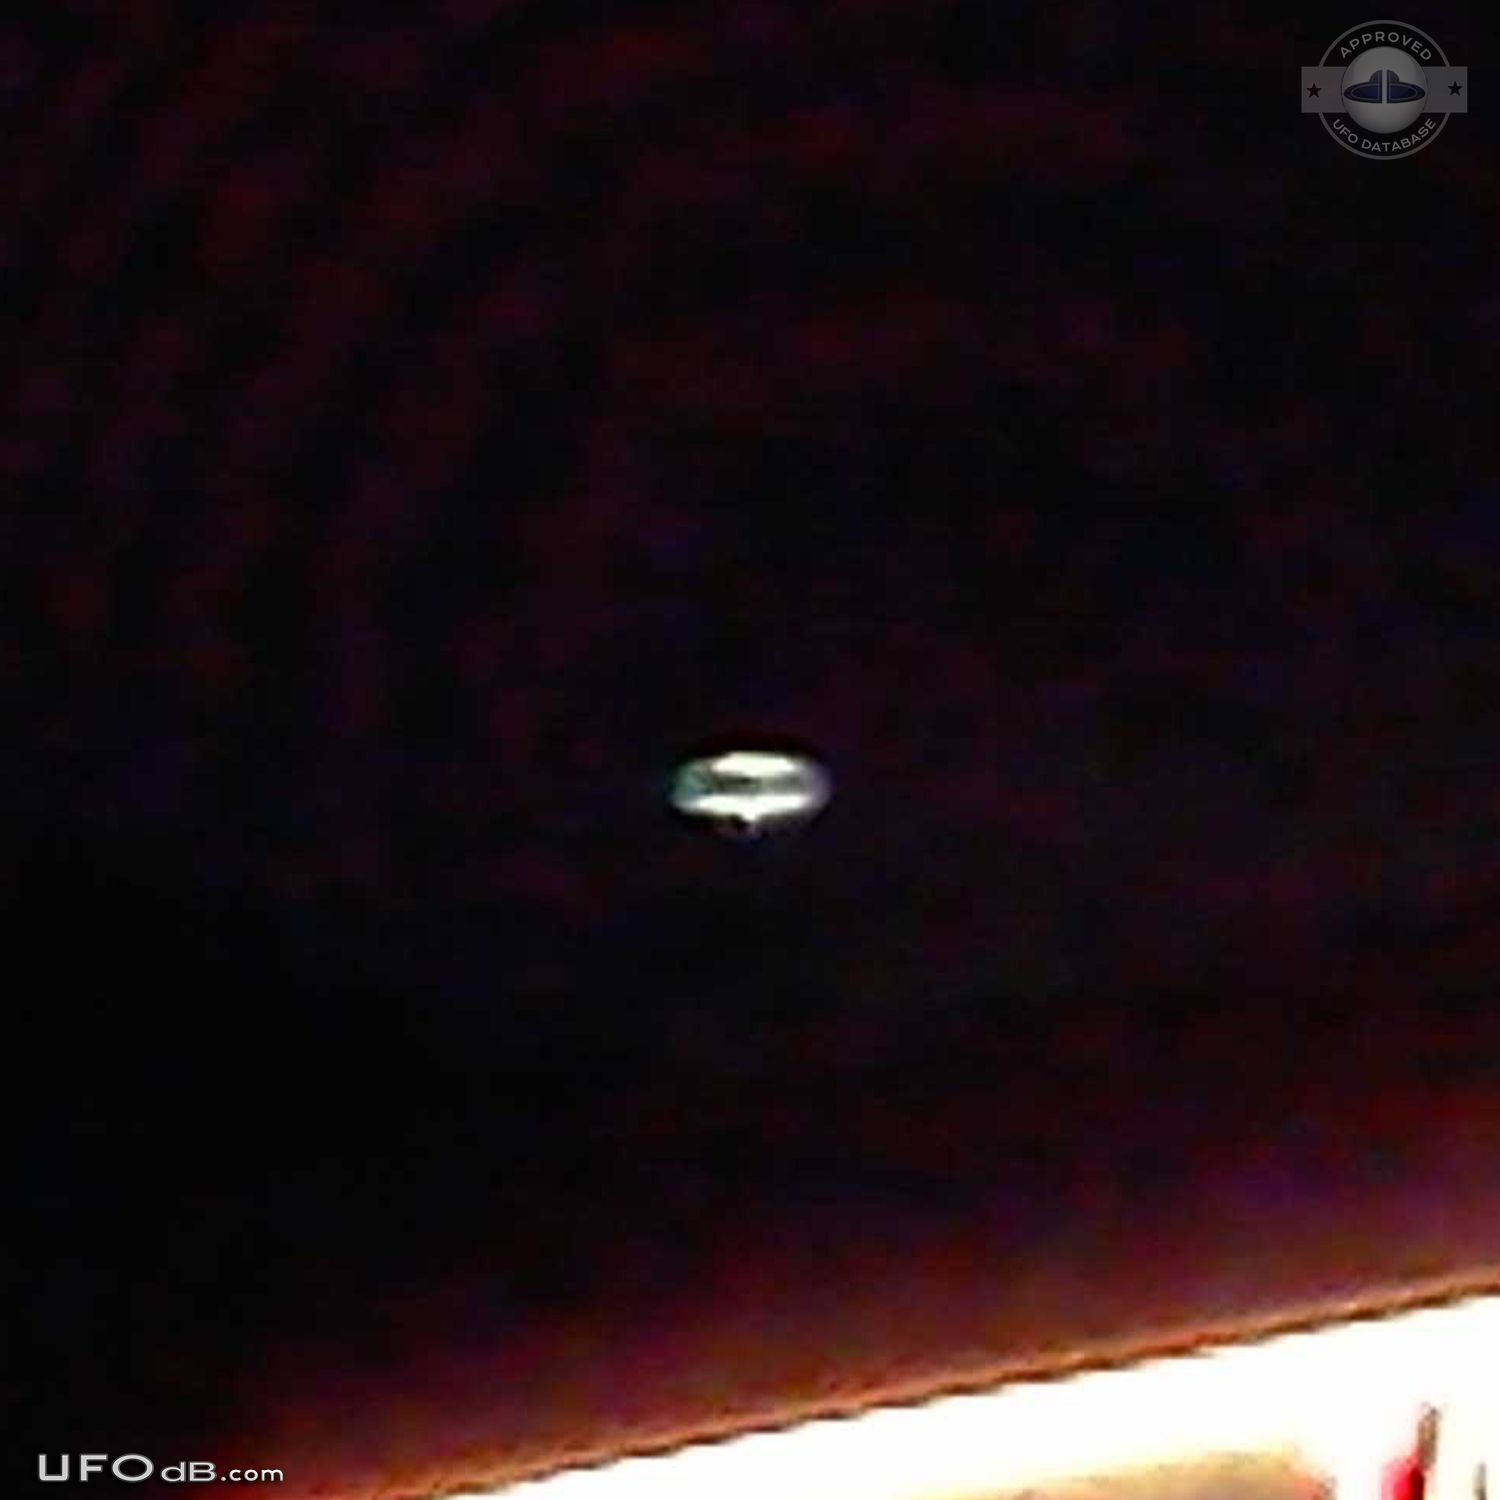 Man take picture of UFO he taught it was a blimp - Los Angeles 2011 UFO Picture #389-2